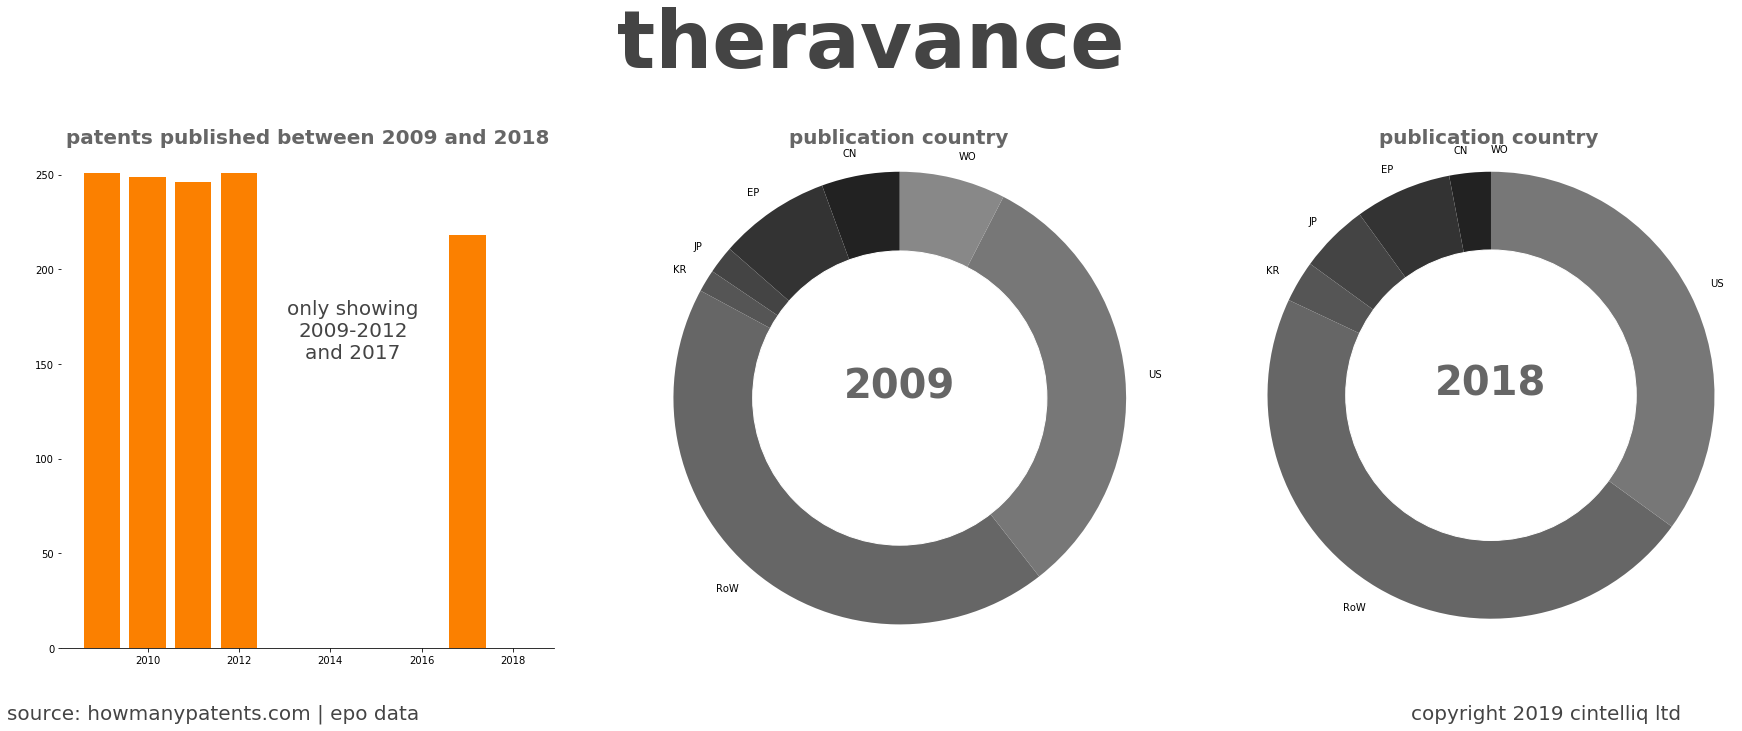 summary of patents for Theravance